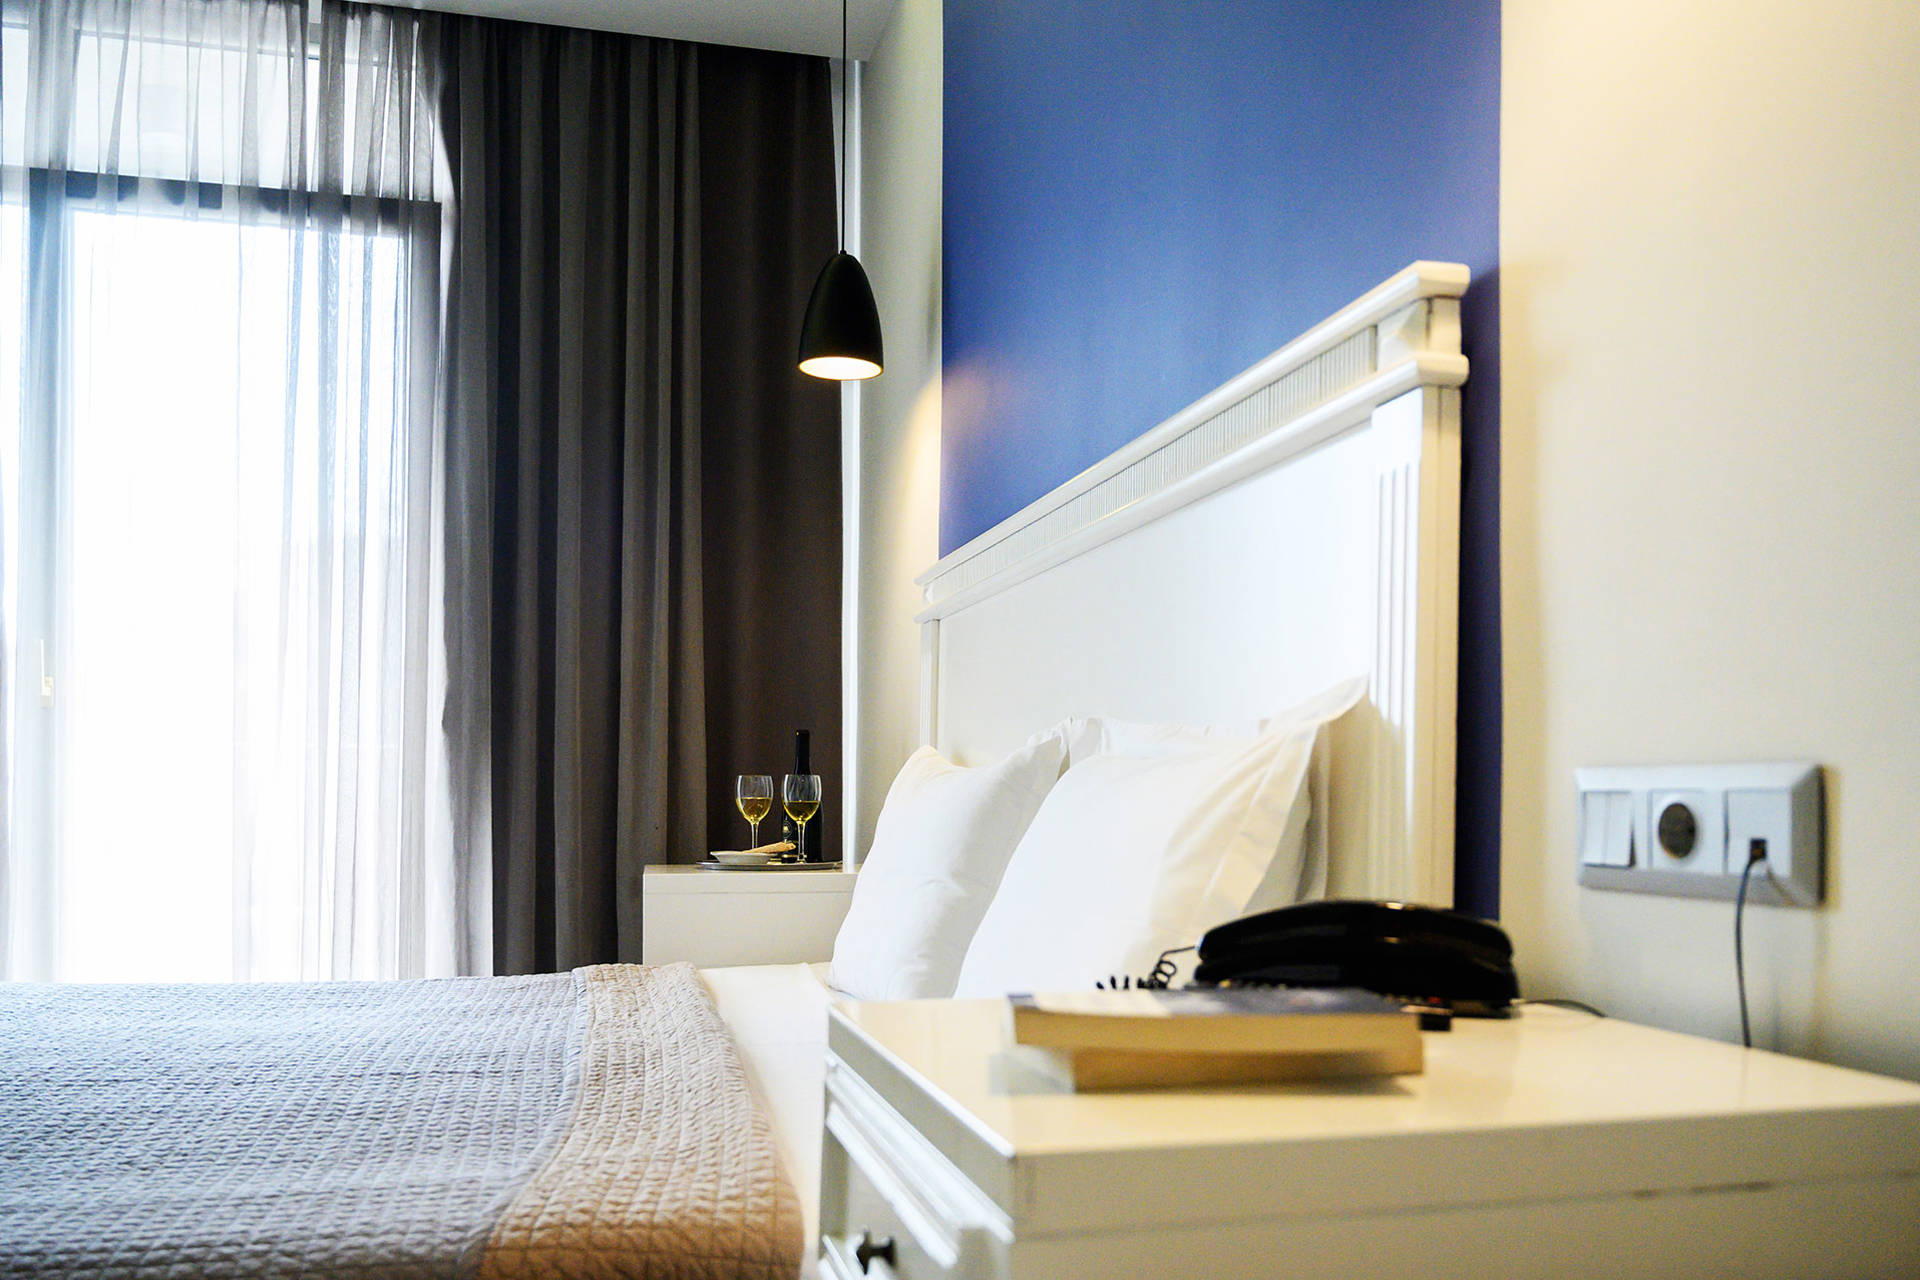 
El Greco Hotel Thessaloniki Triple Room twin bed and bedside tables